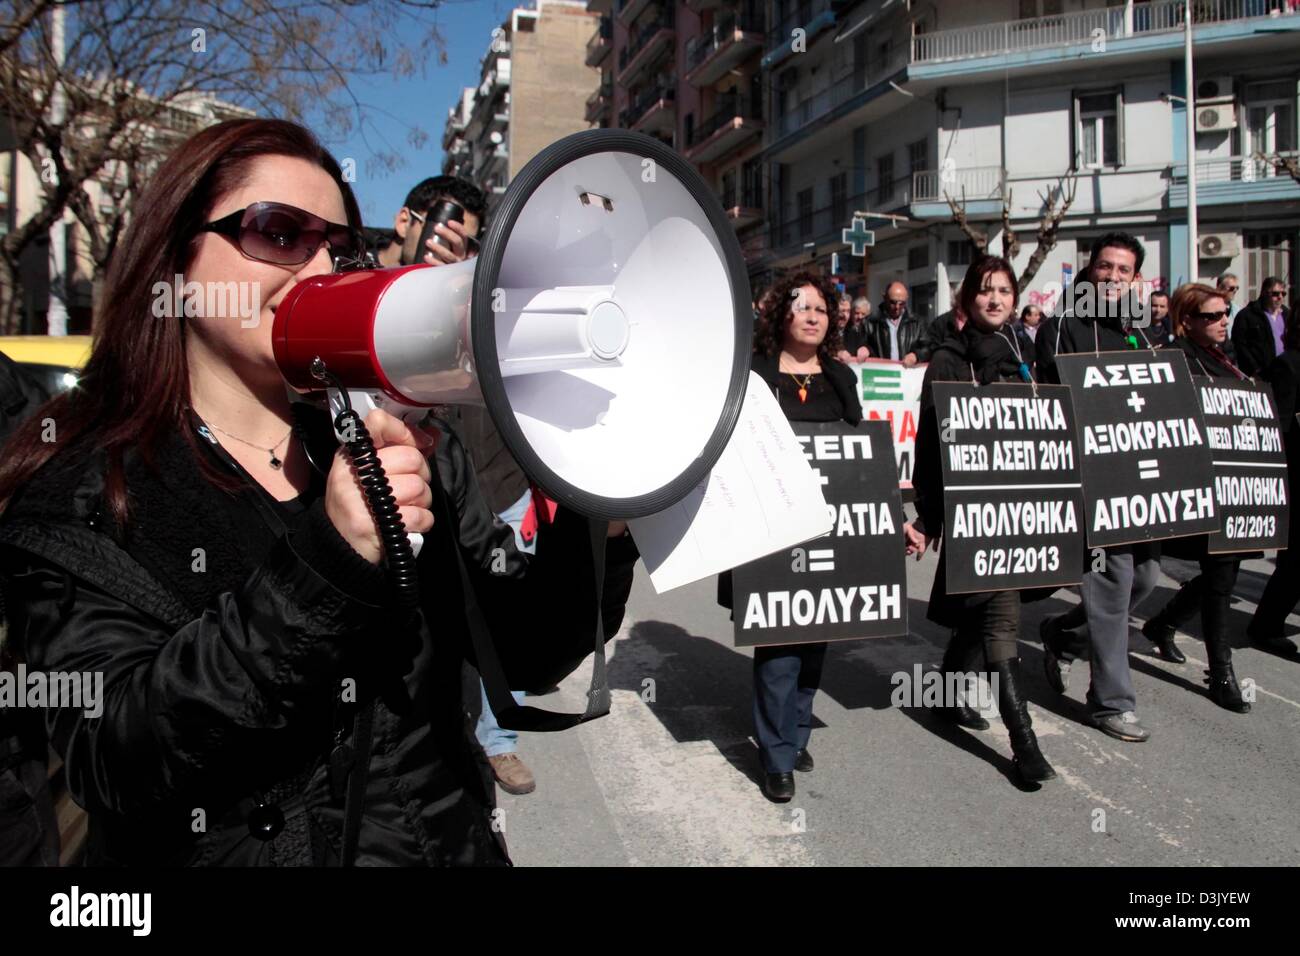 Thessaloniki, Greece. 20th February 2013. A woman calls slogans into a megaphone during a general strike on 20/02/2013 in Thessaloniki, Greece. The strike was called by the trade union confederations of GSEE and ADEDY. Protesters were demonstrating against the austerity measures in Greece which has seen taxes increased and wages, pensions and public spending cut.  Credit:  Art of Focus / Alamy Live News Stock Photo